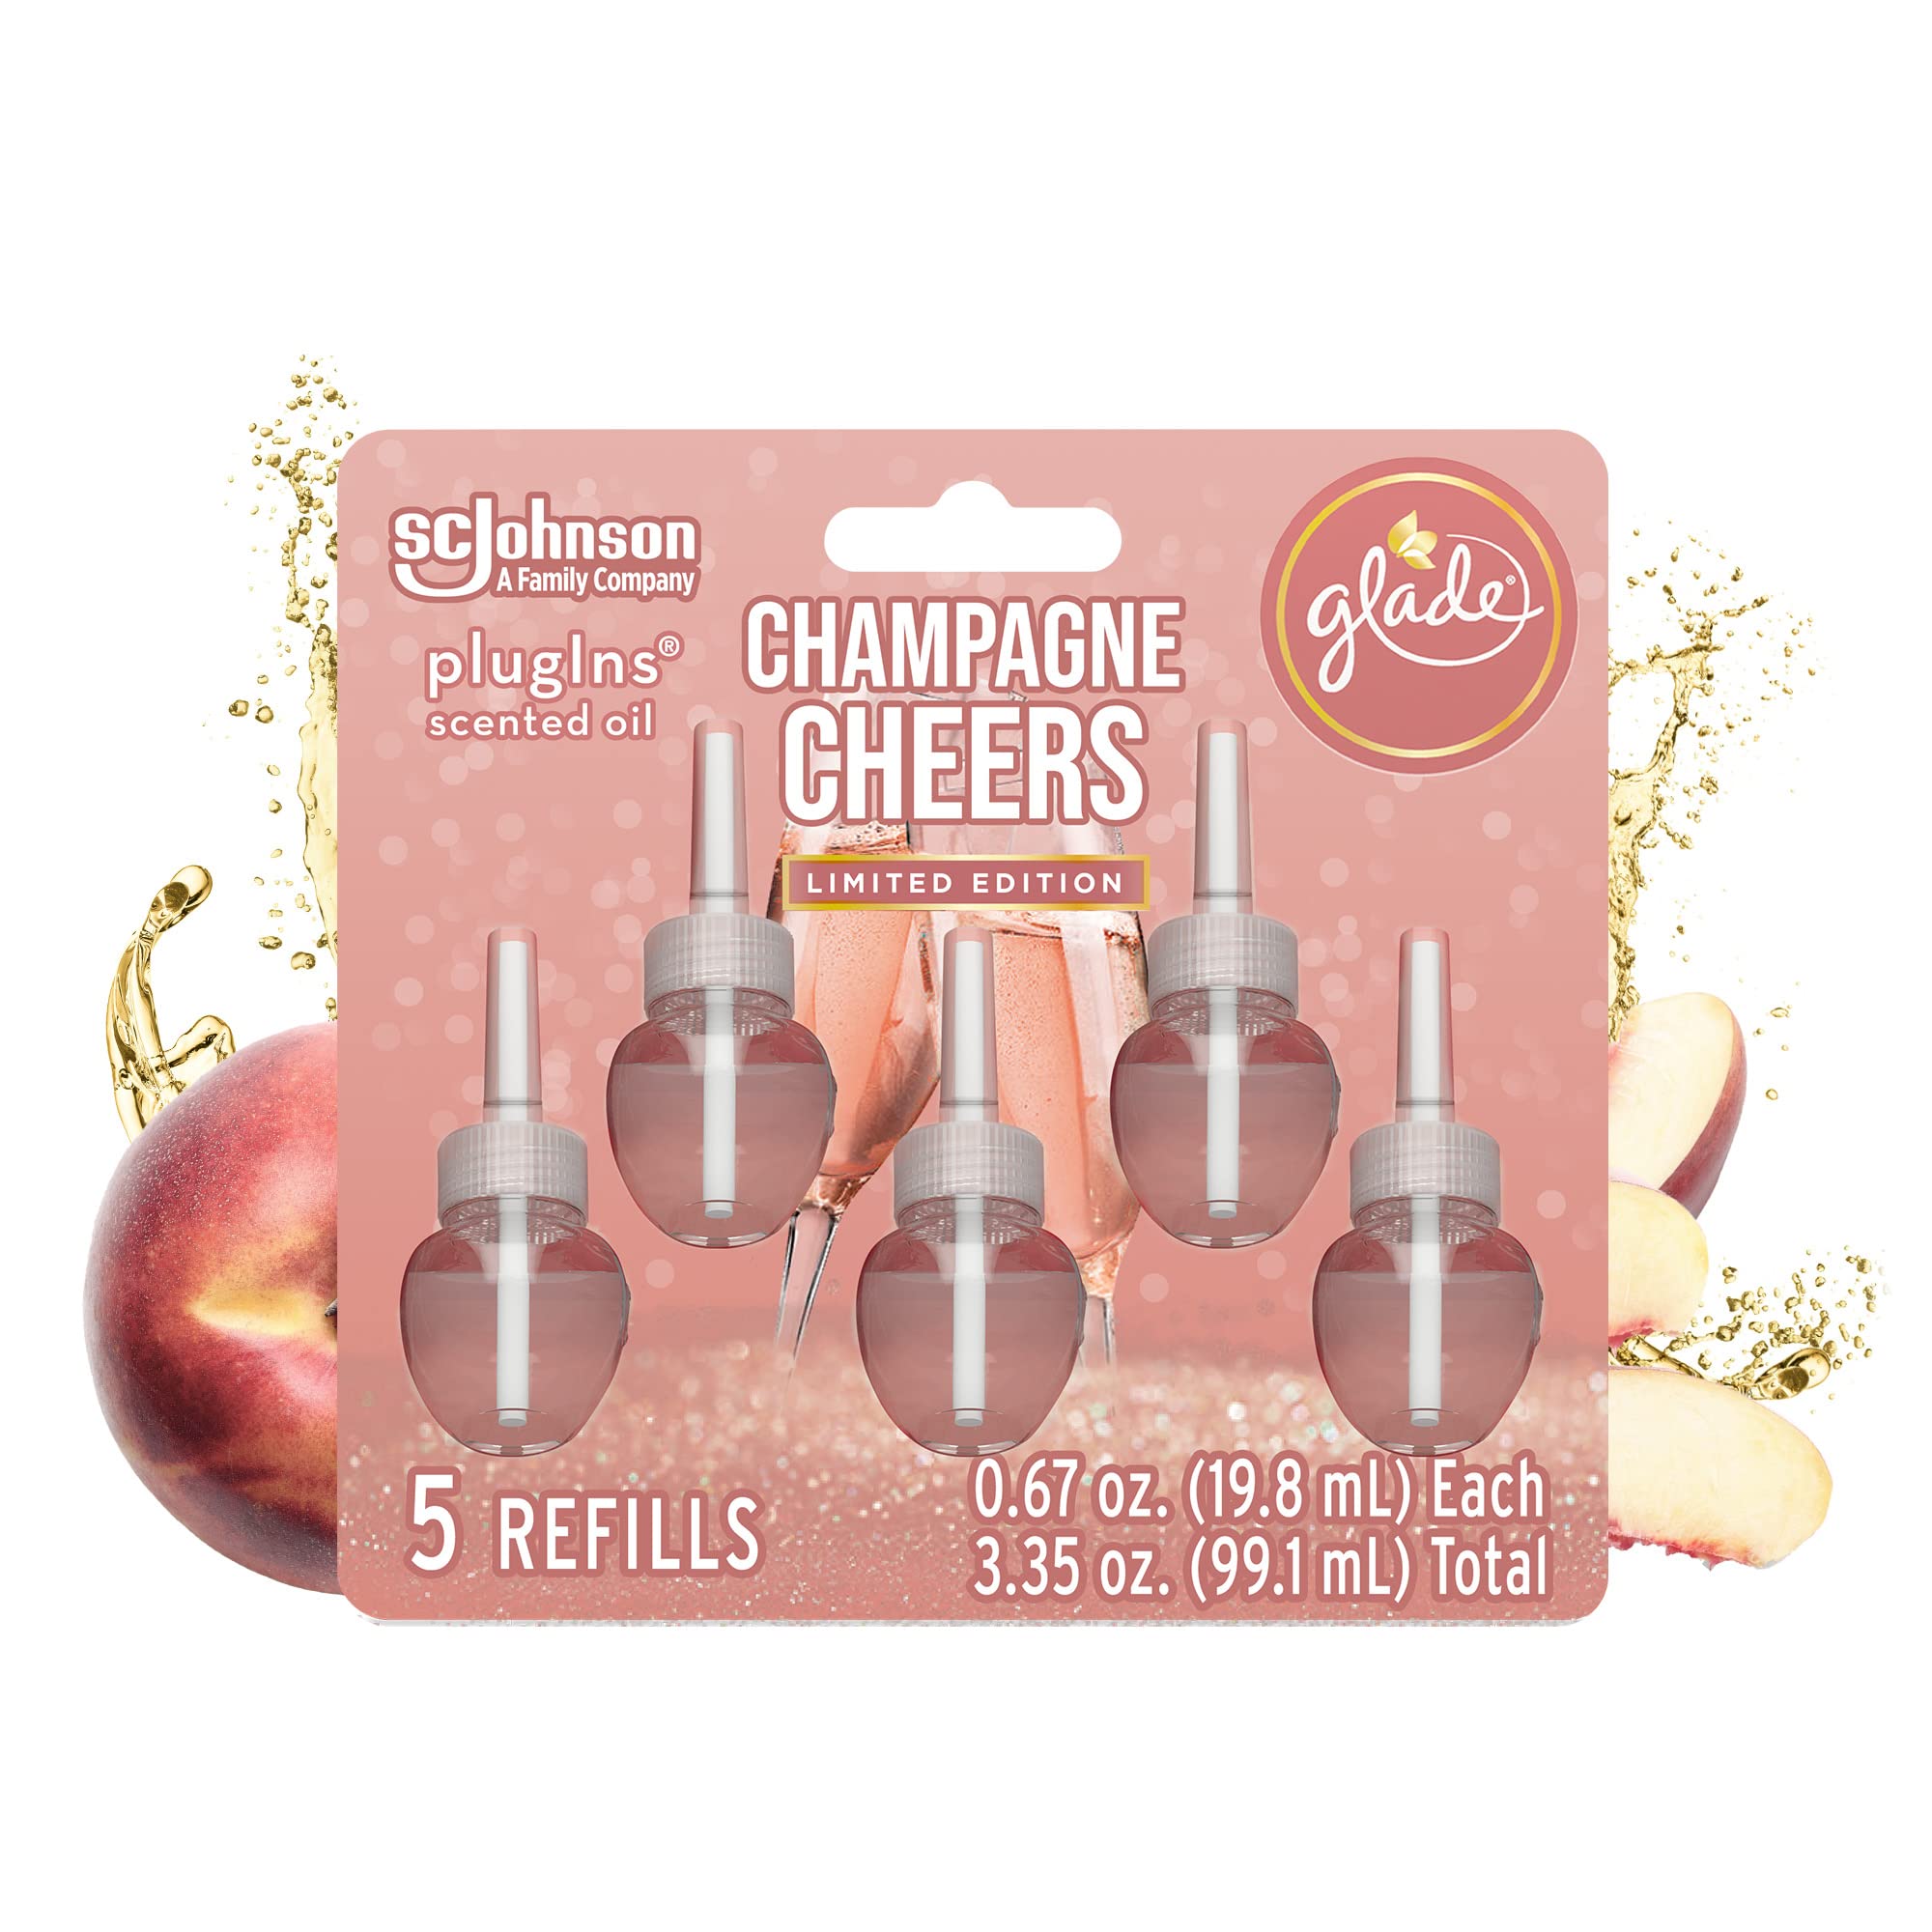 Glade PlugIns Refills Air Freshener, Scented and Essential Oils for Home and Bathroom, Champagne Cheers, 3.35 Fl Oz, 5 Count